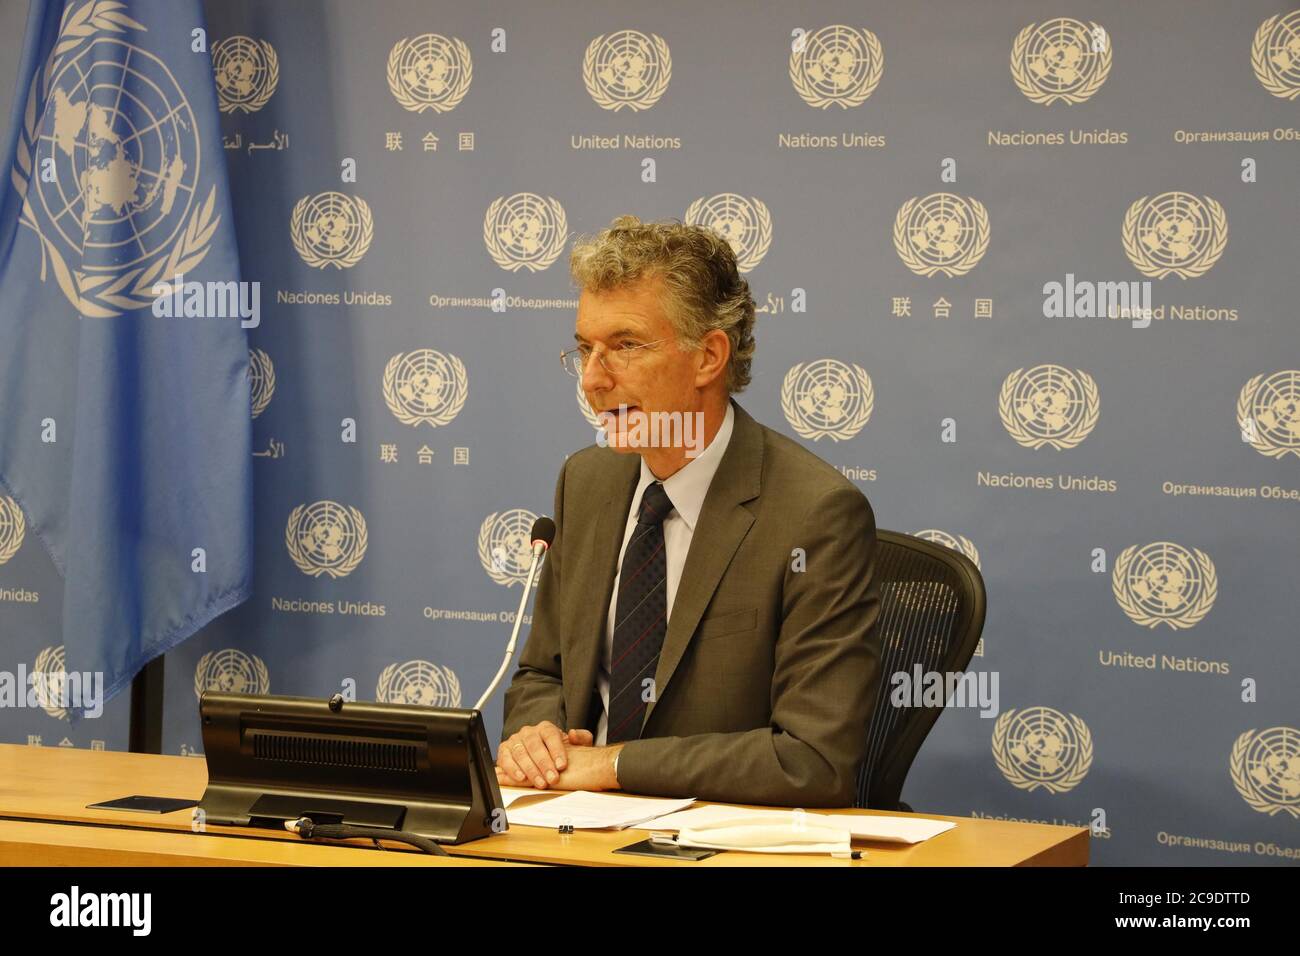 United Nations, UN headquarters in New York. 30th July, 2020. Christoph Heusgen, Germany's permanent representative to the United Nations, speaks at a press encounter at the UN headquarters in New York, on July 30, 2020. In response to U.S. President Donald Trump's intention to attend this year's General Assembly General Debate in person, Christoph Heusgen said on Thursday that it makes no sense for world leaders to be physically present given the COVID-19 pandemic. Credit: Xie E/Xinhua/Alamy Live News Stock Photo